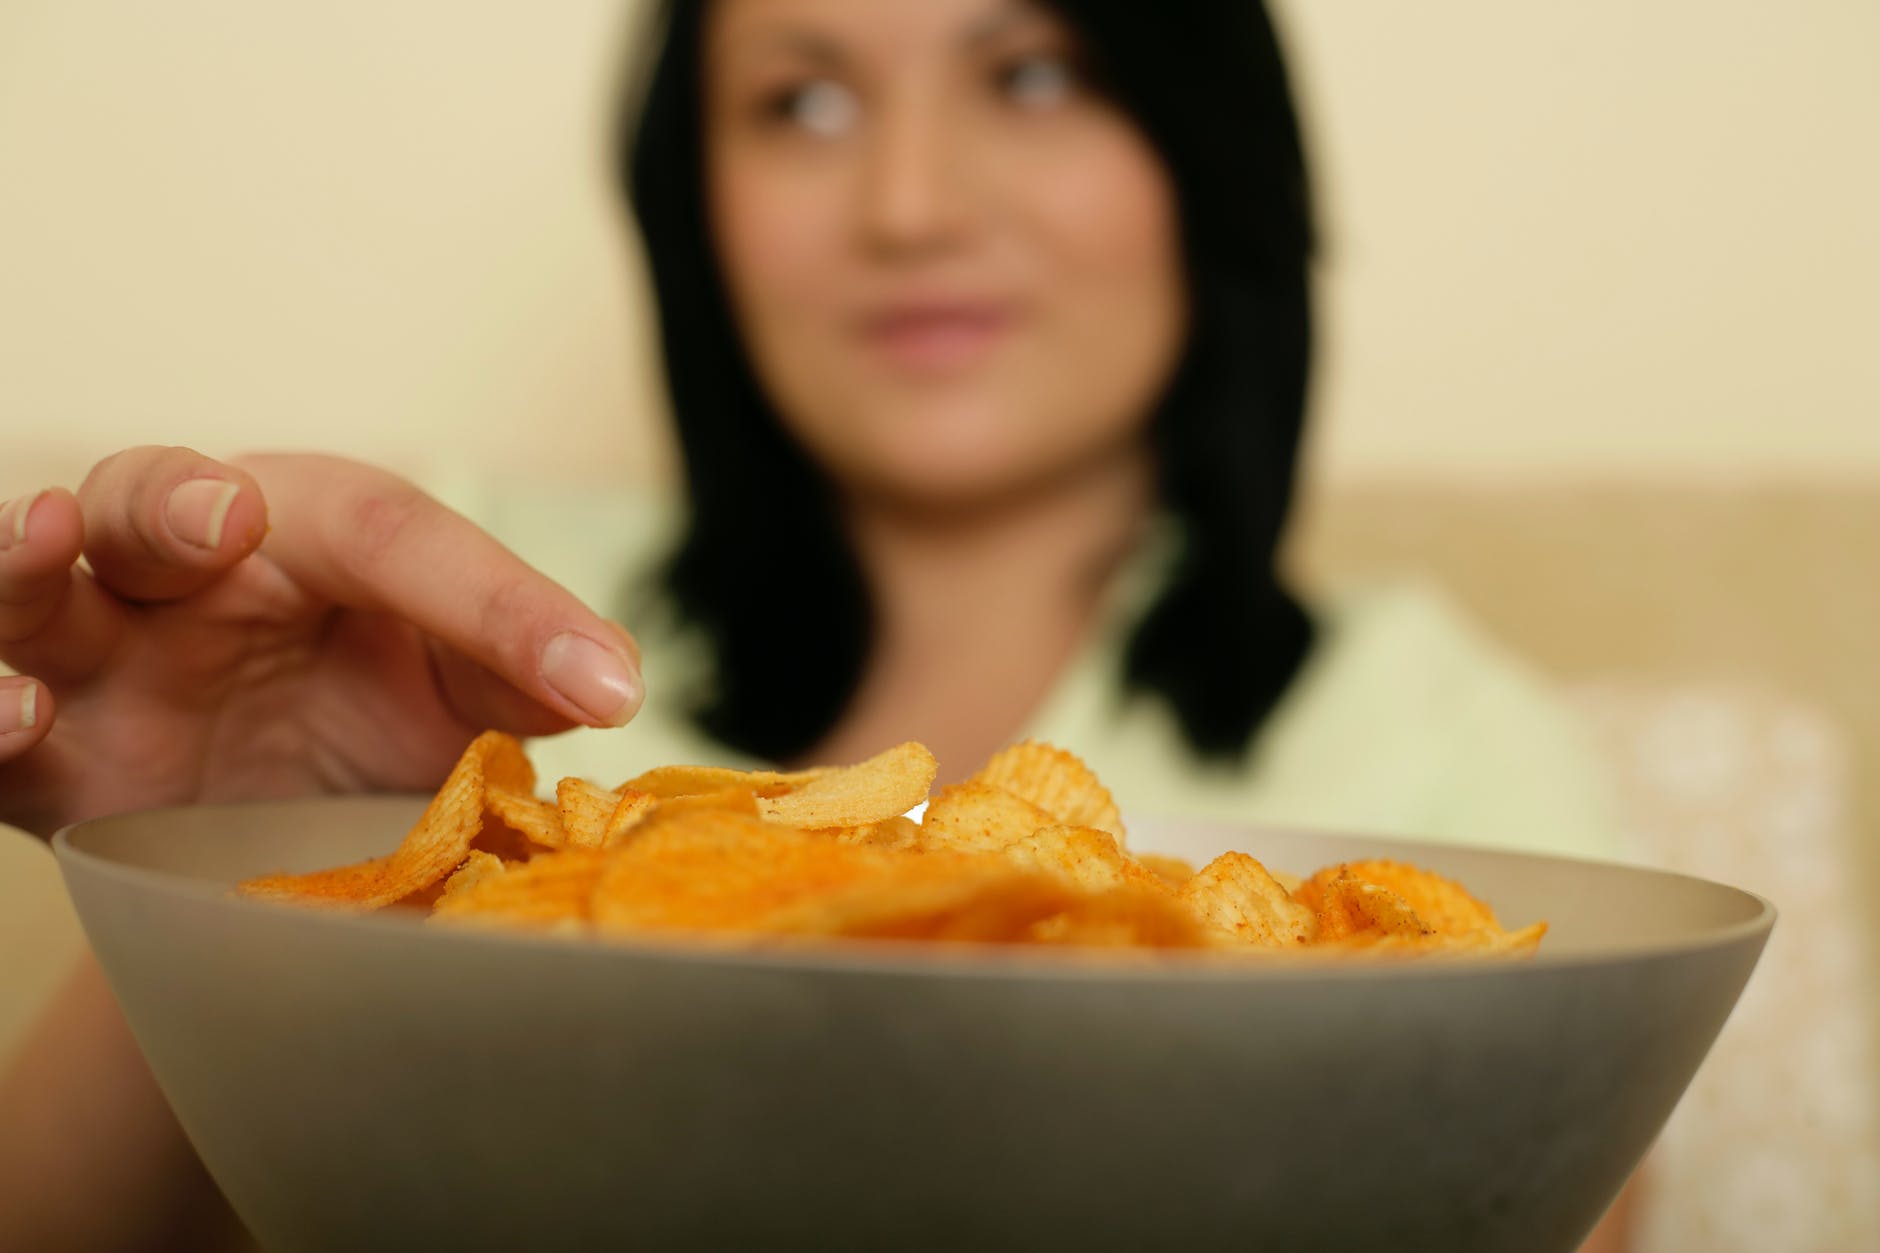 photo of a bowl with crisps and a woman in the background reaching for the crisps